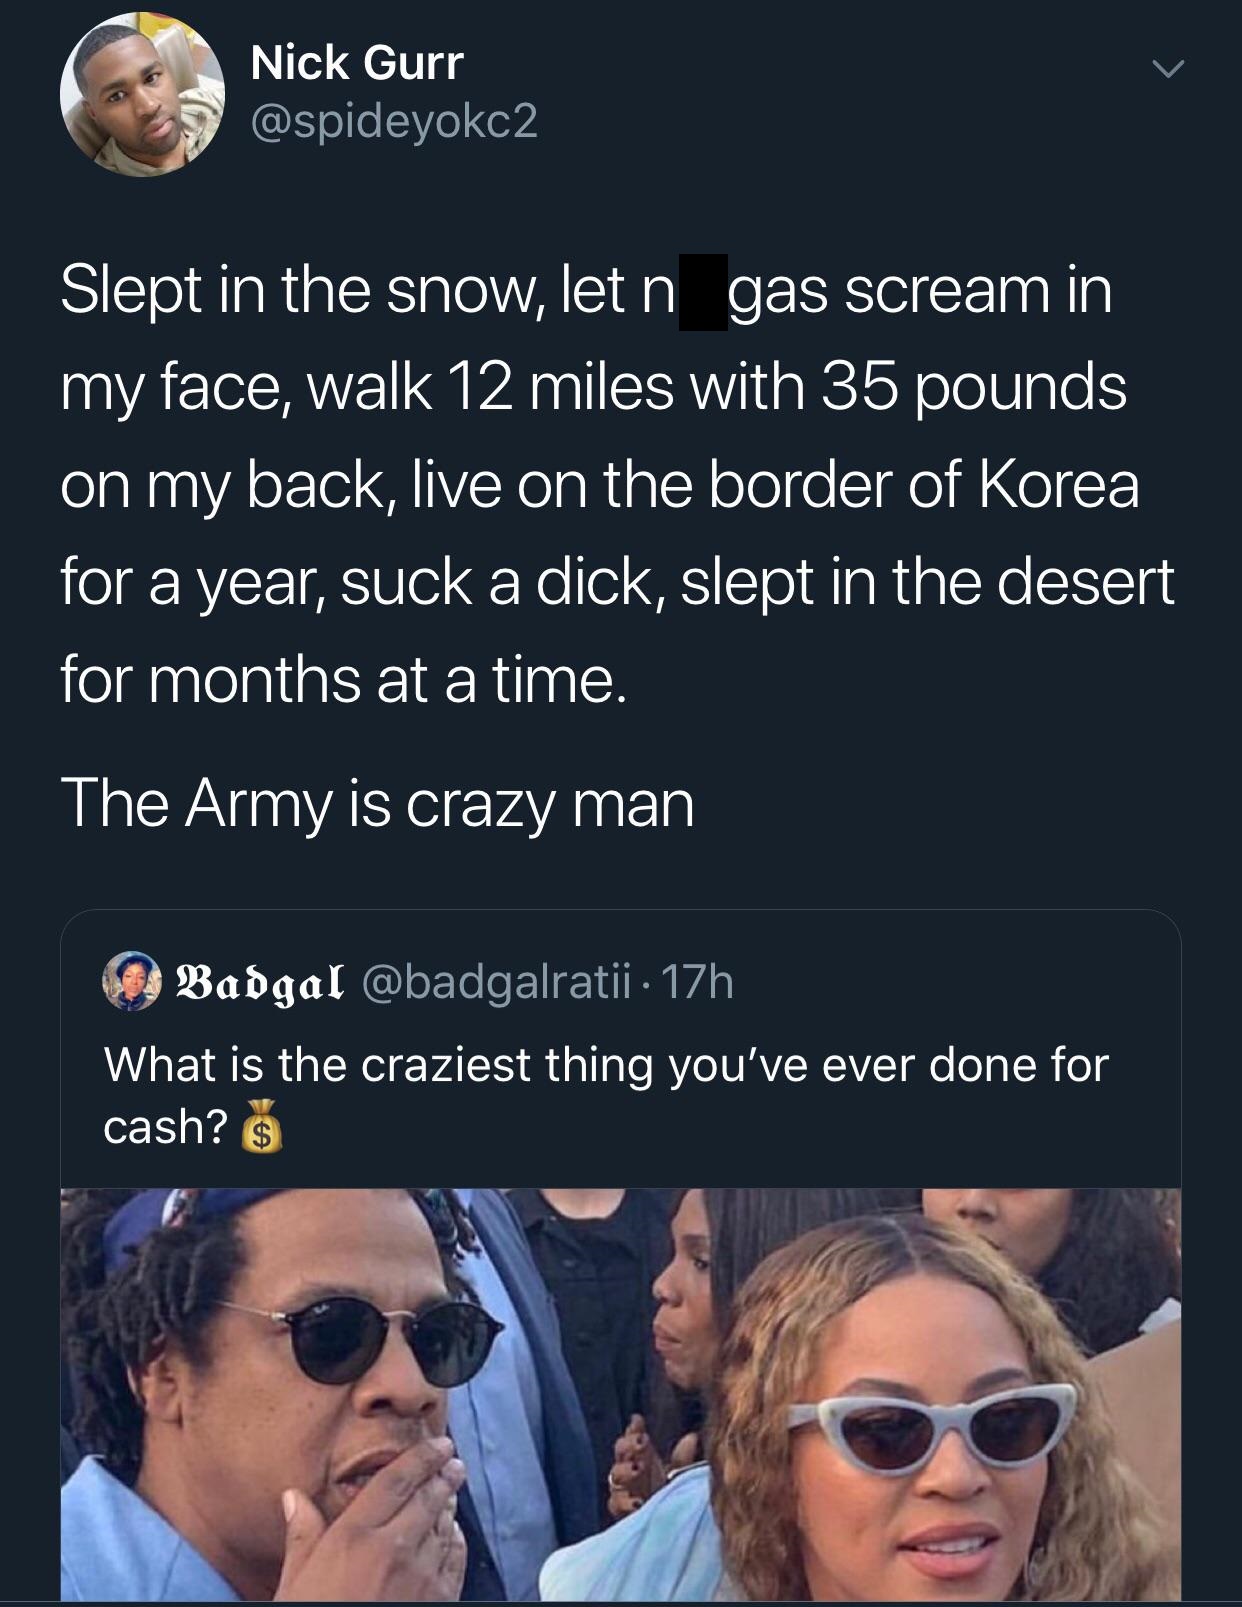 black twitter - Nick Gurr Slept in the snow, let n gas scream in my face, walk 12 miles with 35 pounds on my back, live on the border of Korea for a year, suck a dick, slept in the desert for months at a time. The Army is crazy man  What is the craziest t